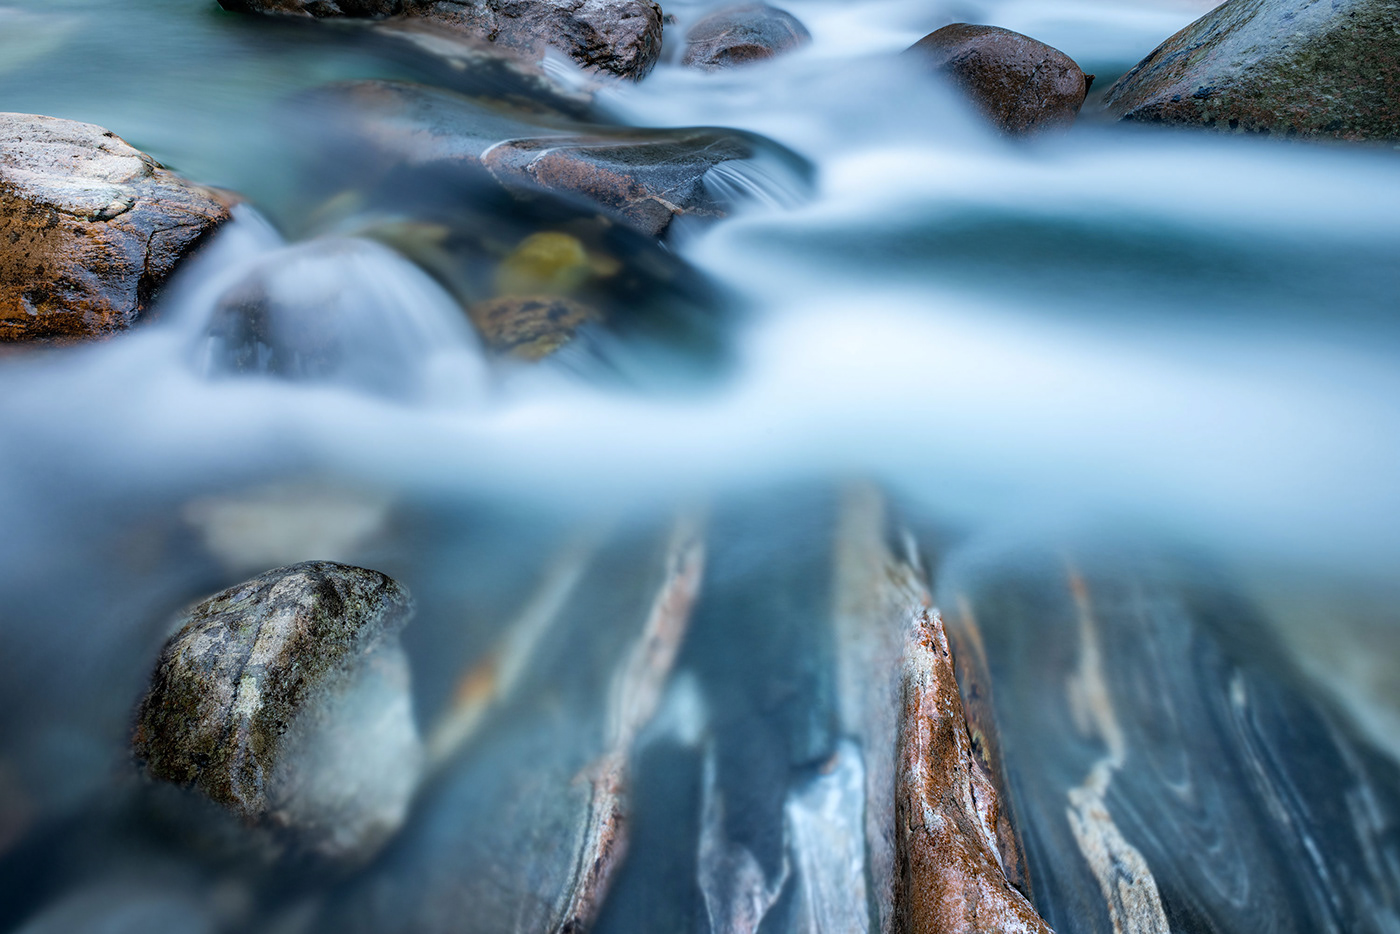 Long exposure photography of the Verzasca river by Jennifer Esseiva.